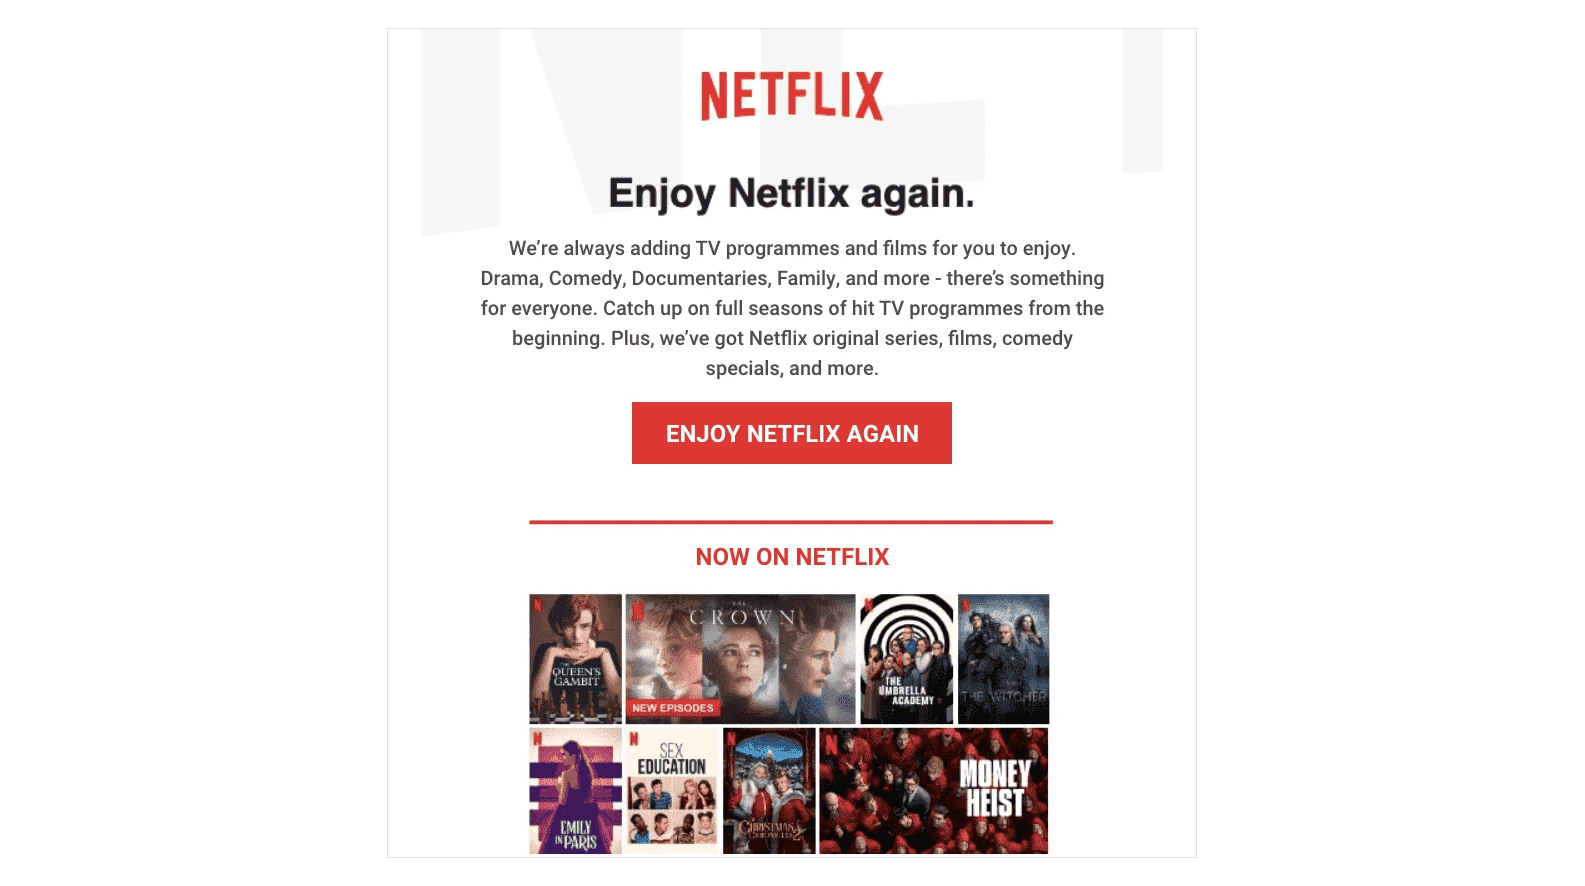 Drip email campaign for Re-Engagement by netflix